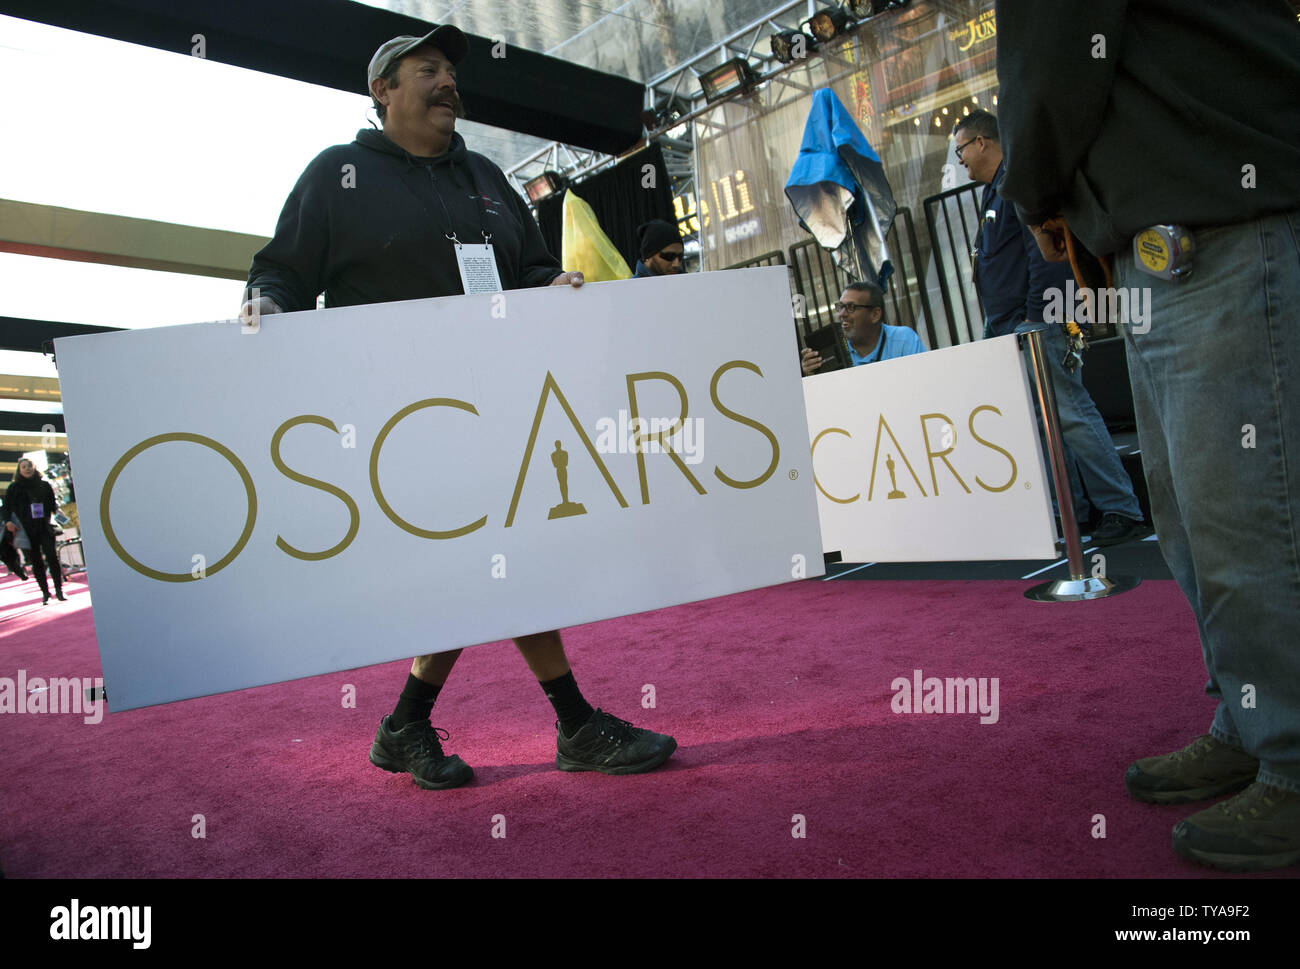 Workers install Oscars signage on the red carpet as preparations are underway for the 89th annual Academy Awards in the Hollywood section of Los Angeles on February 24, 2017. The 2017 Academy Awards will take place this Sunday, February 25. Photo by Kevin Dietsch/UPI Stock Photo